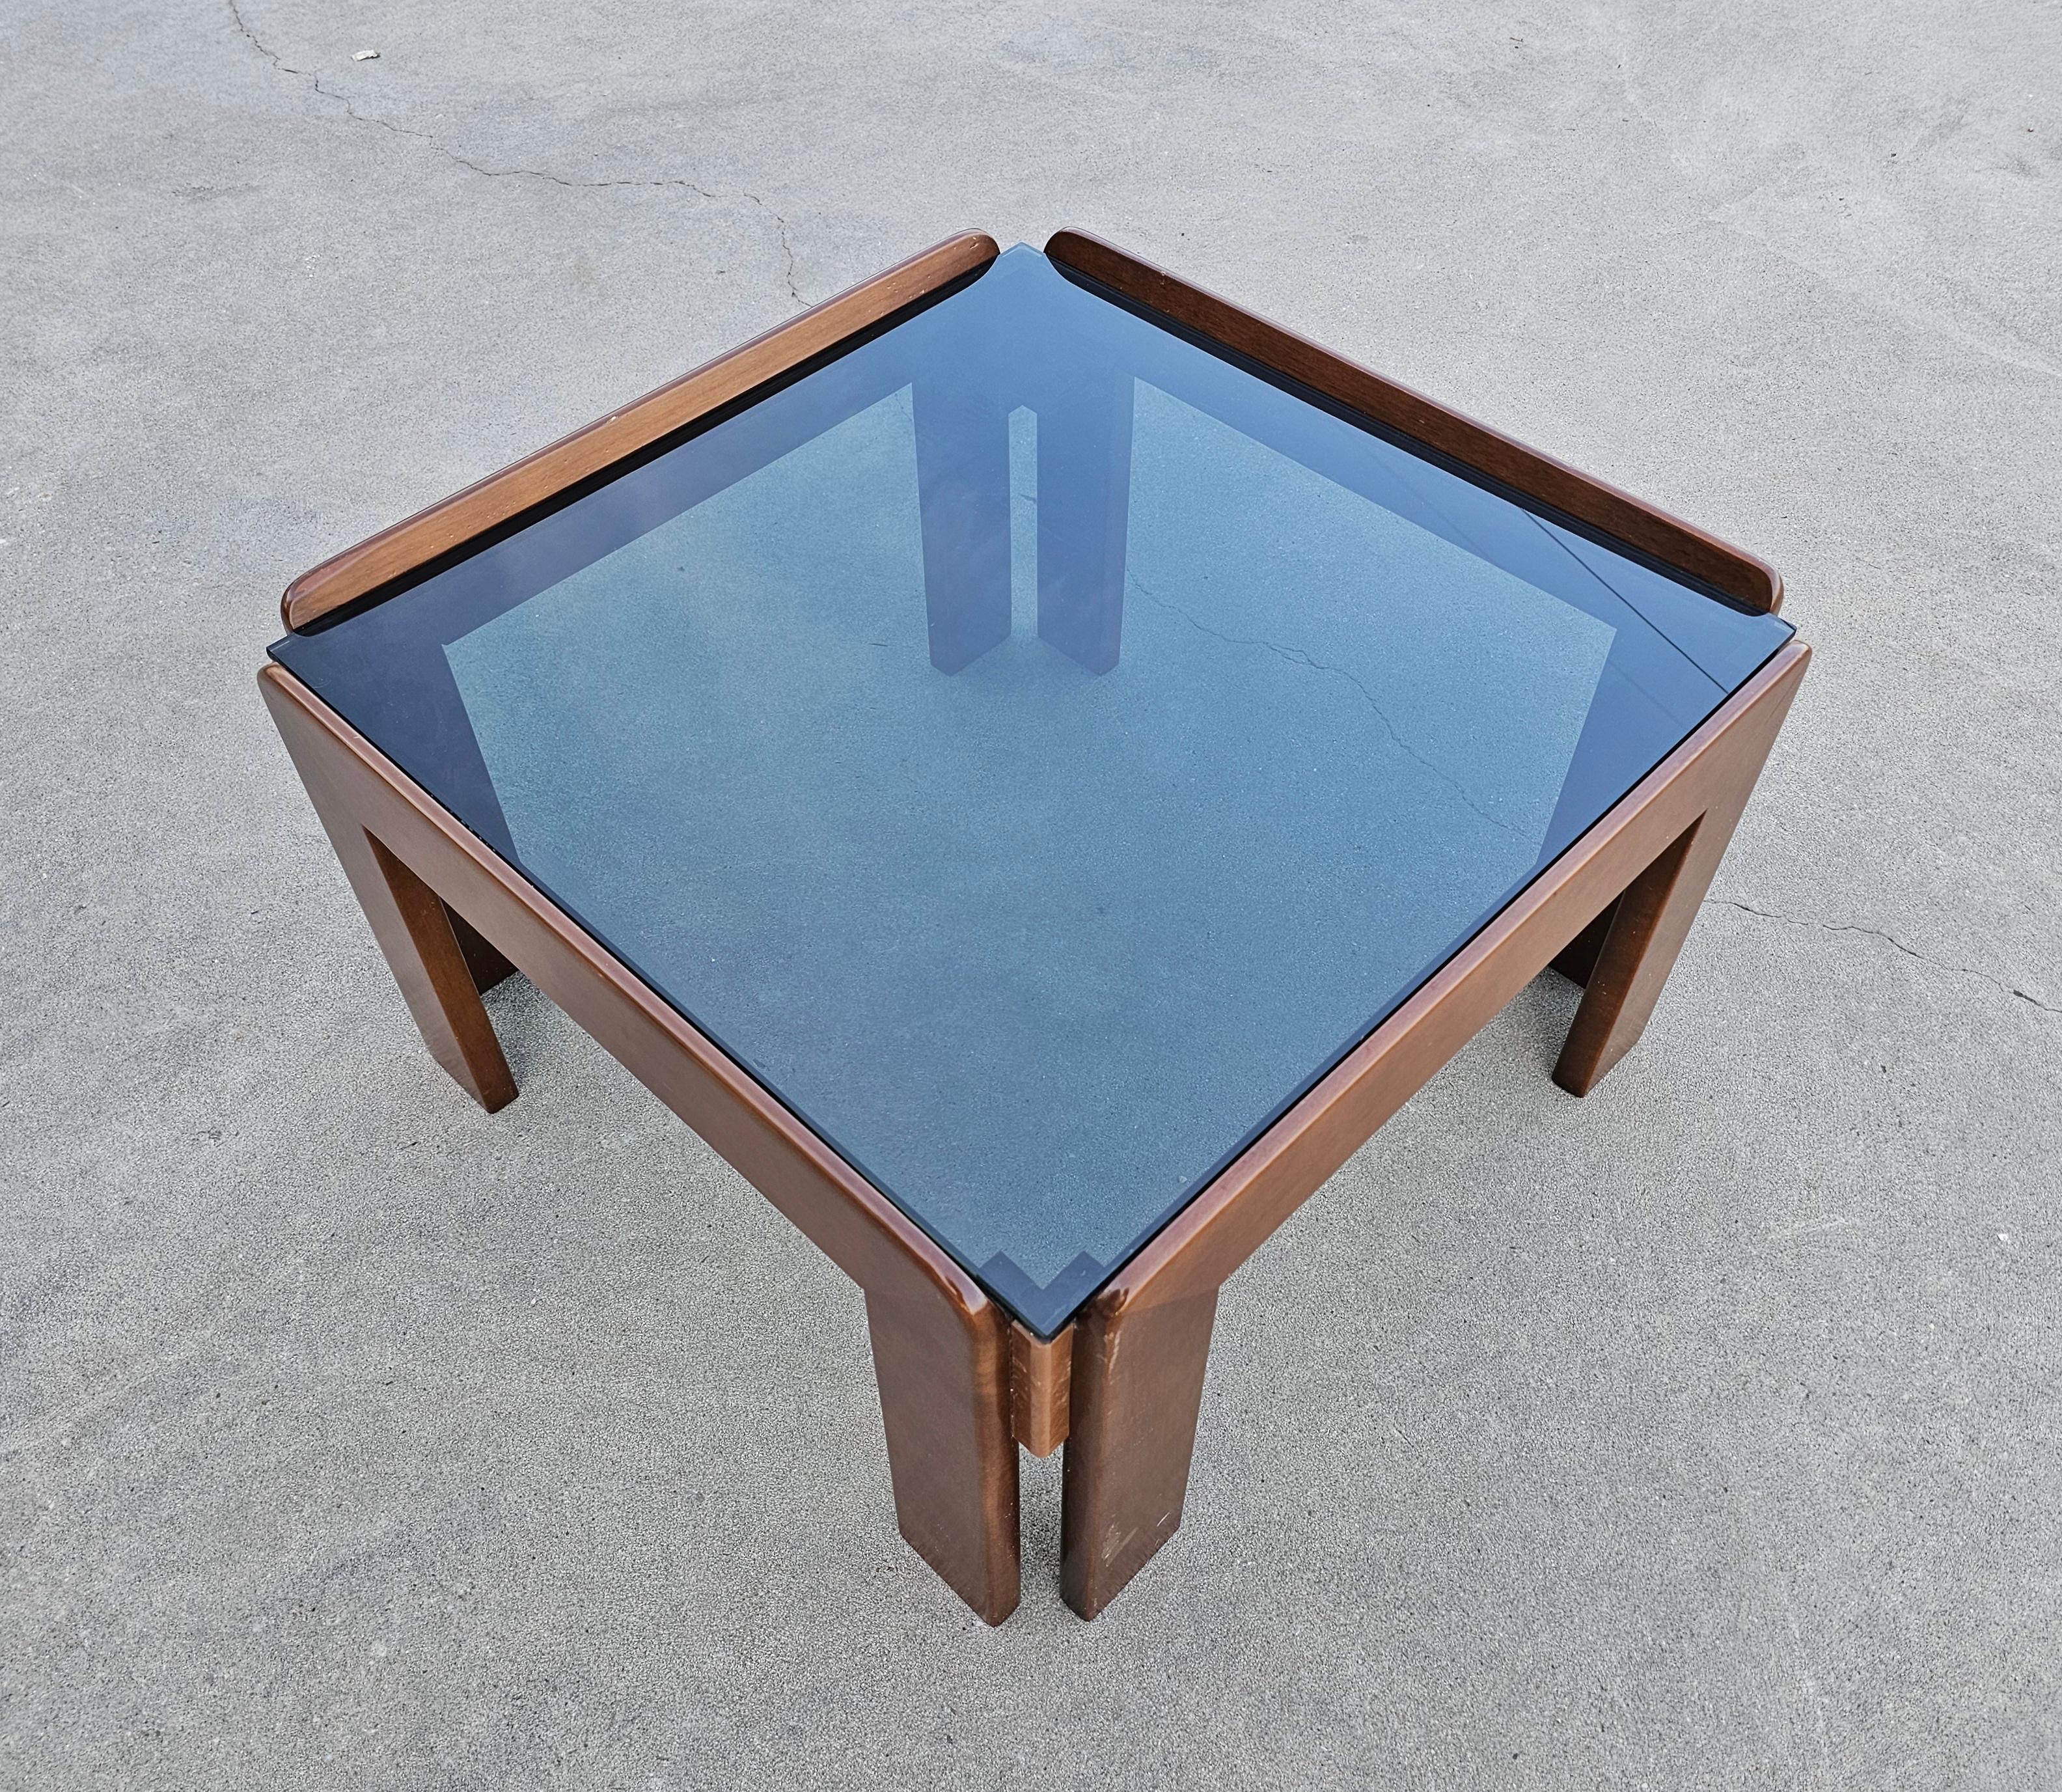 In this listing you will find a very rare Mid Century Modern coffee table designed by Afra and Tobia Scarpa, the Italian duo who is behind some of the most iconic pieces of Mid Century design. The coffee table is done in walnut, with smoked glass